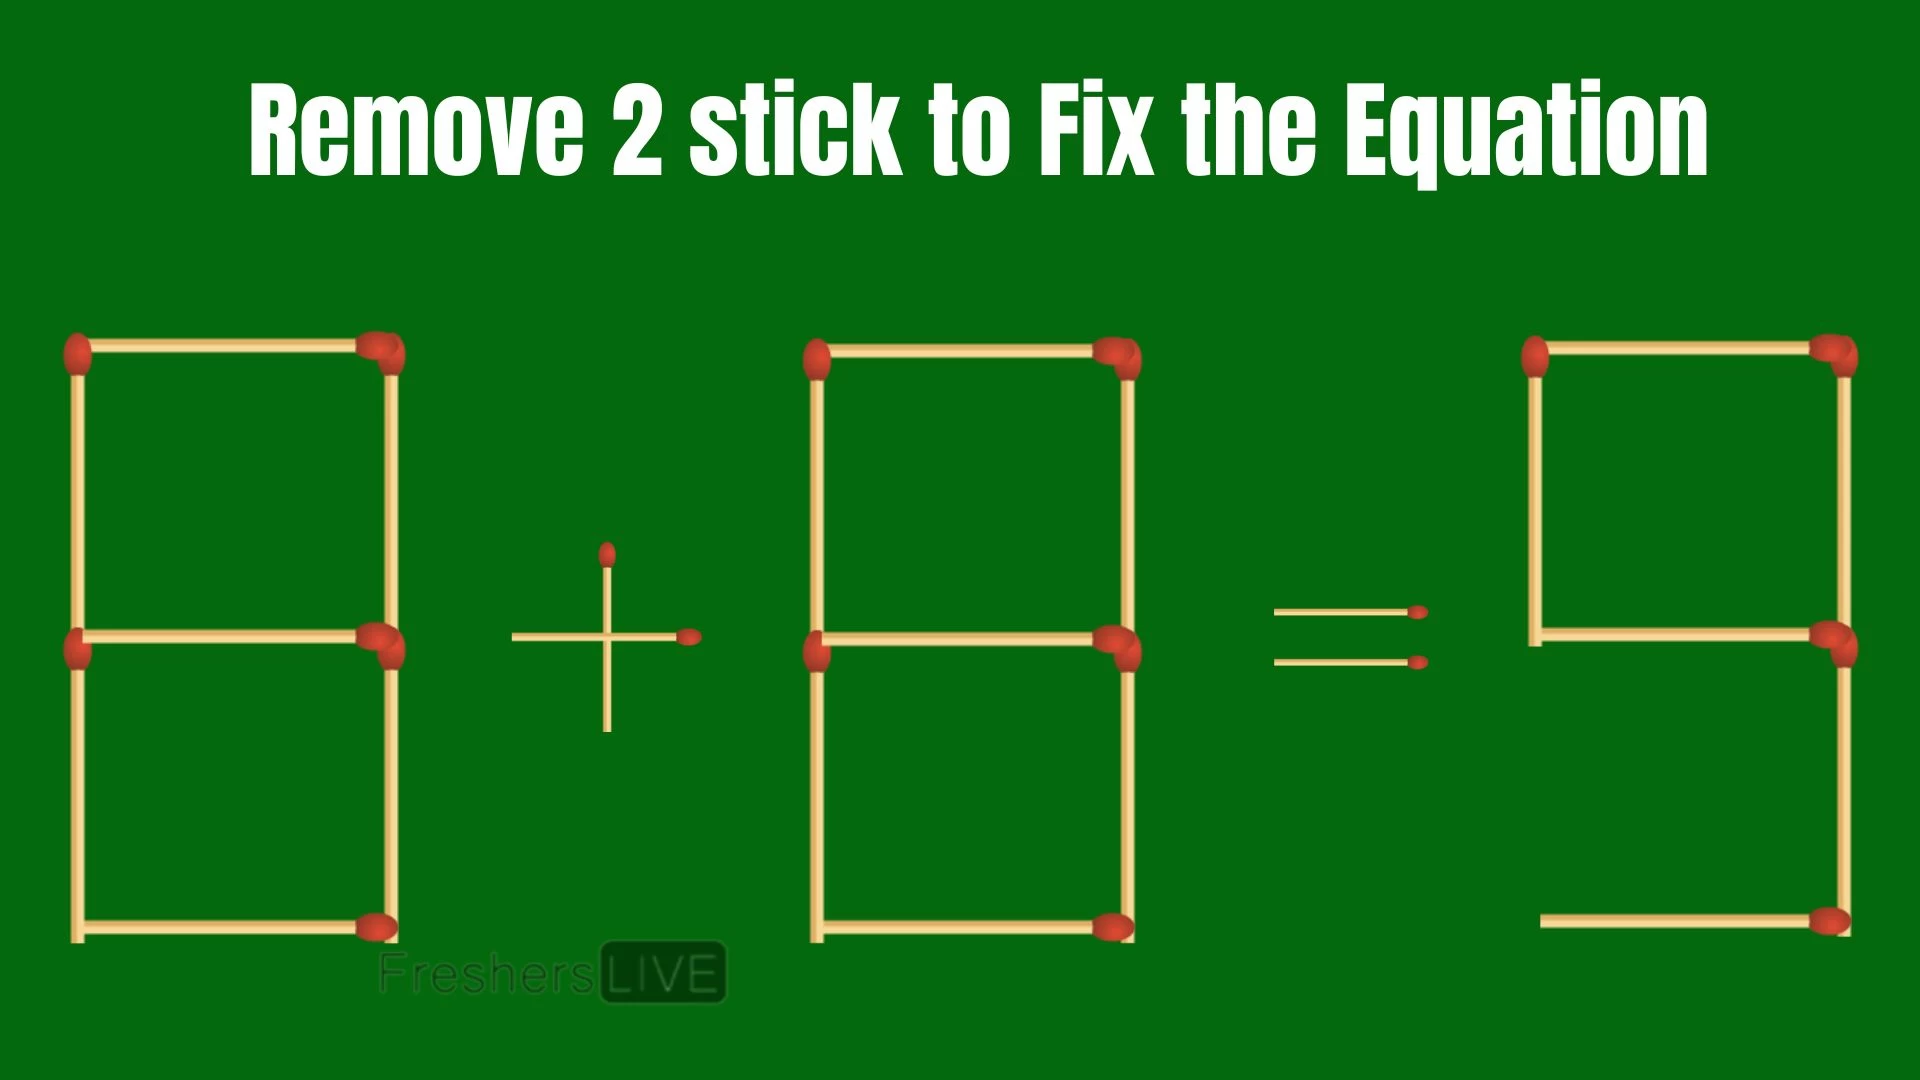 Solve the Puzzle Where 8+8=9 by Removing 2 Sticks to Fix the Equation